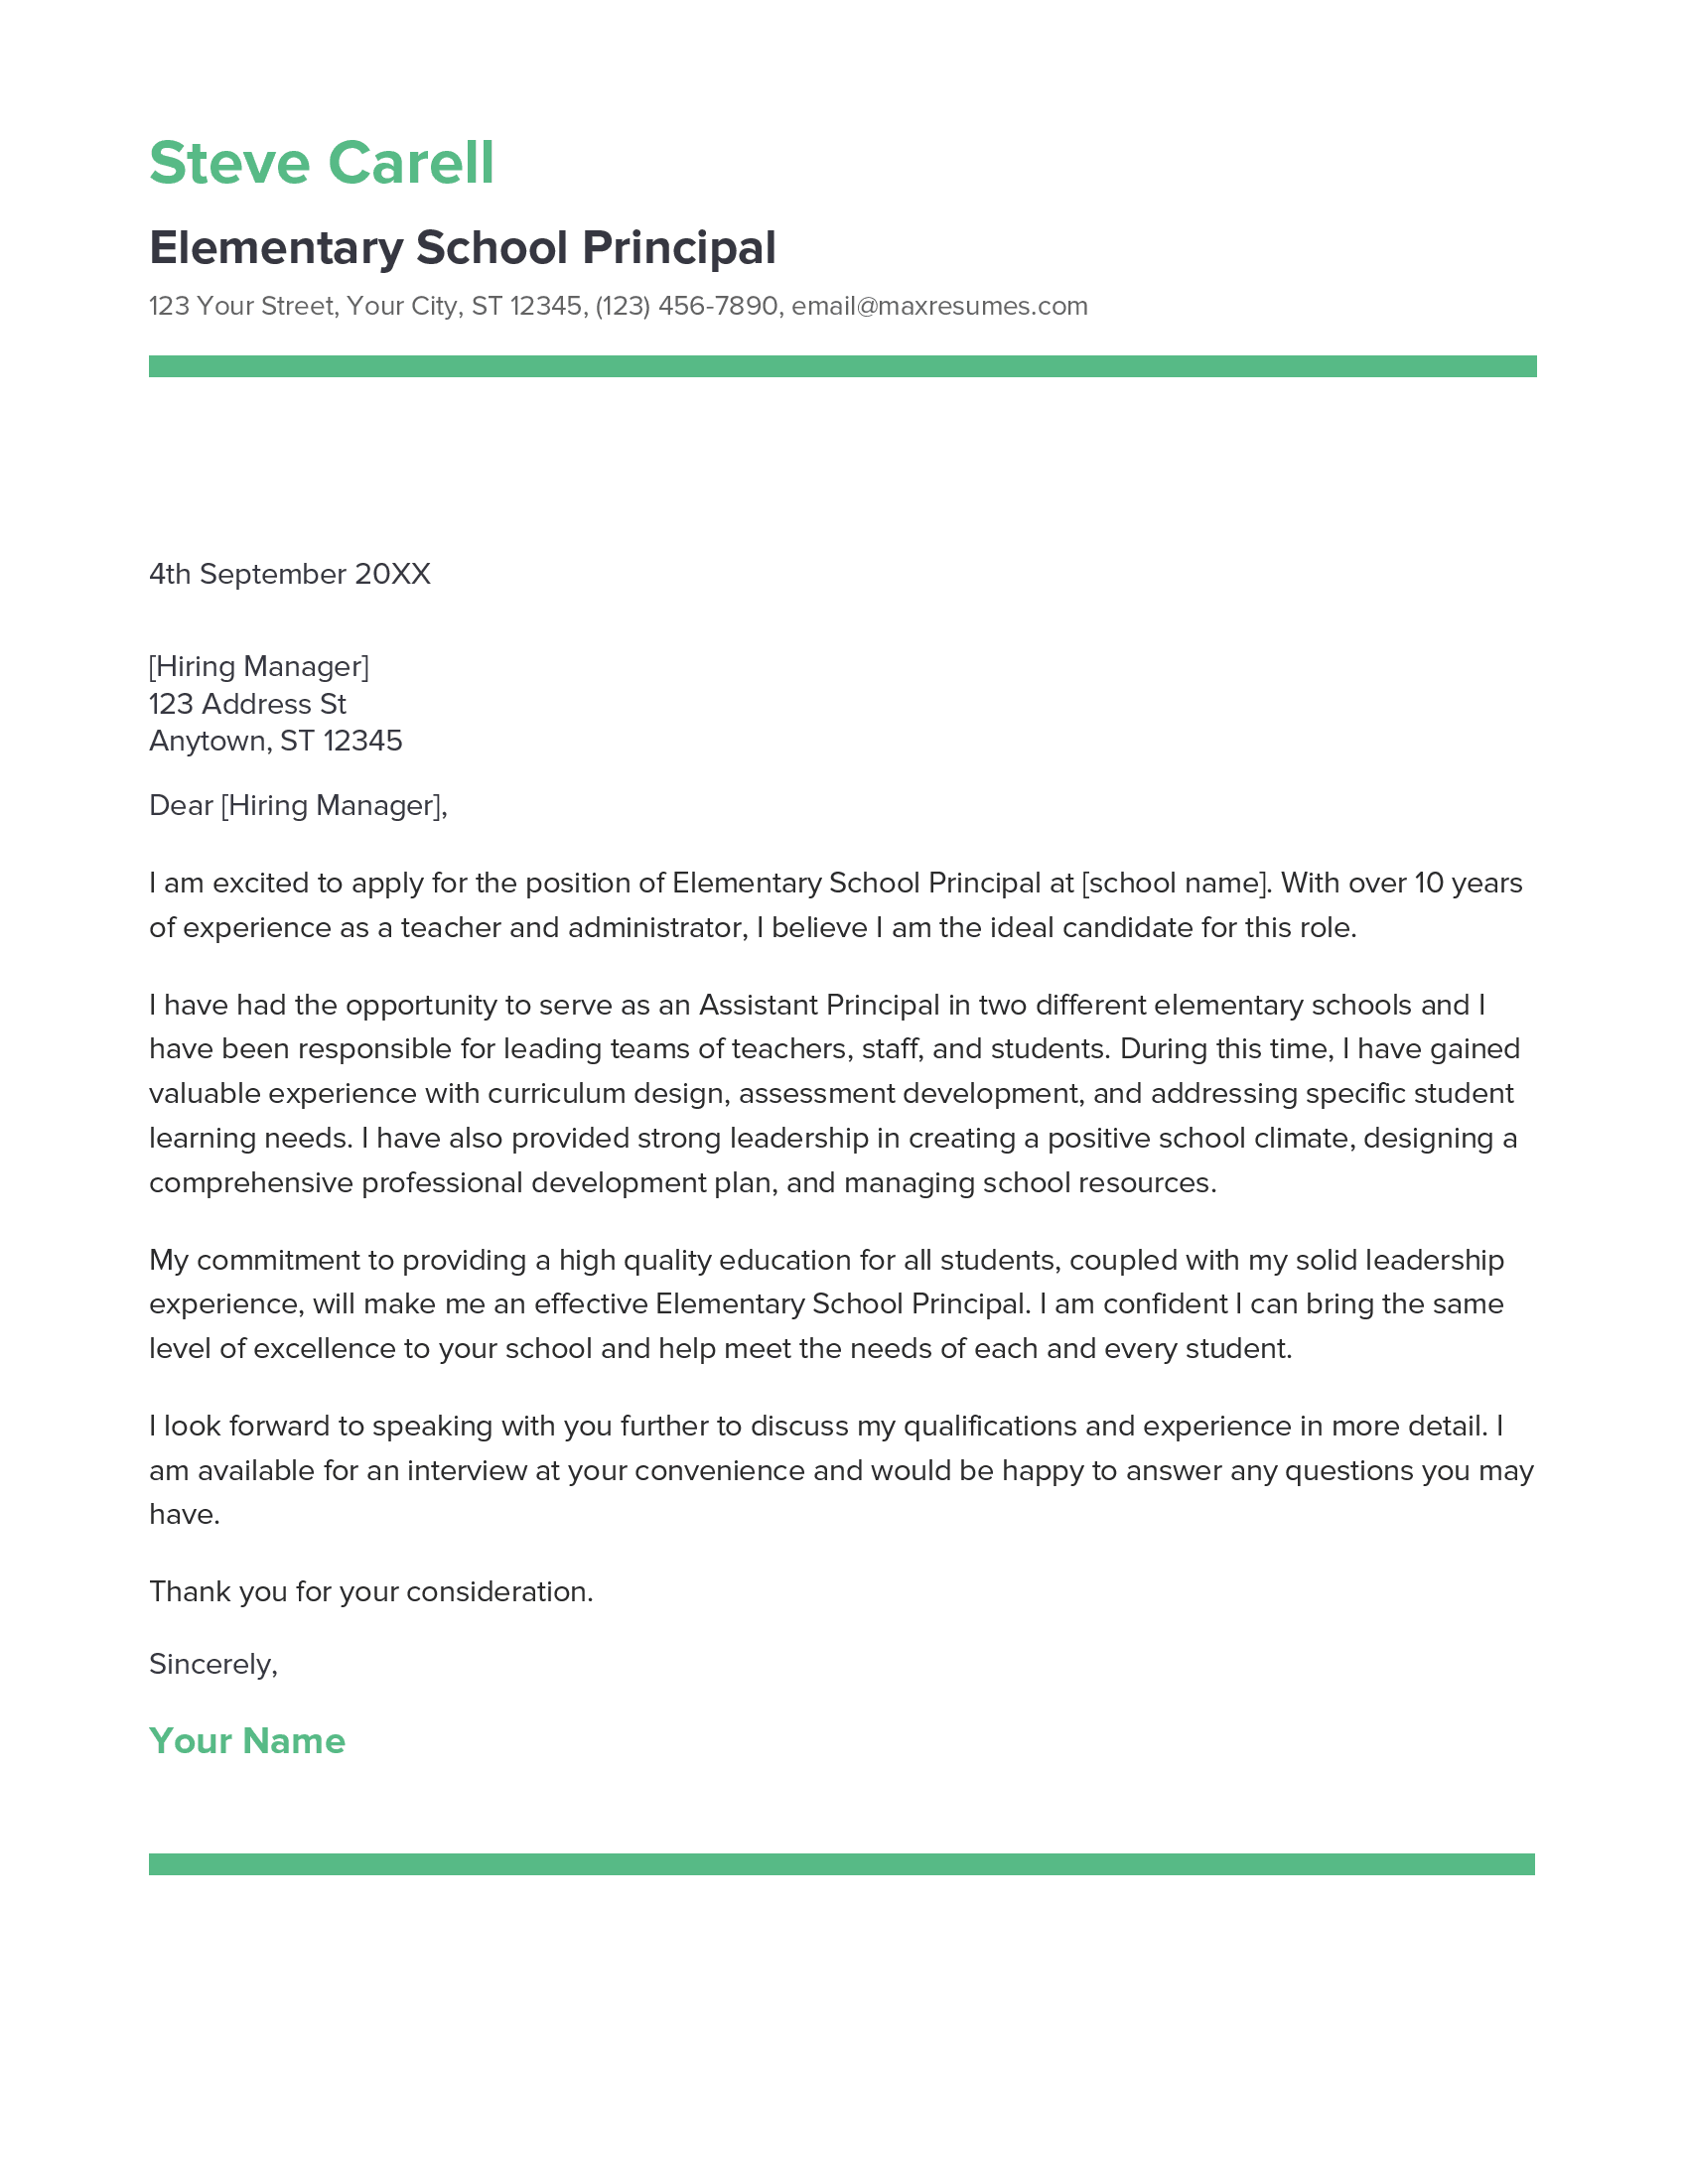 Elementary School Principal Cover Letter Example